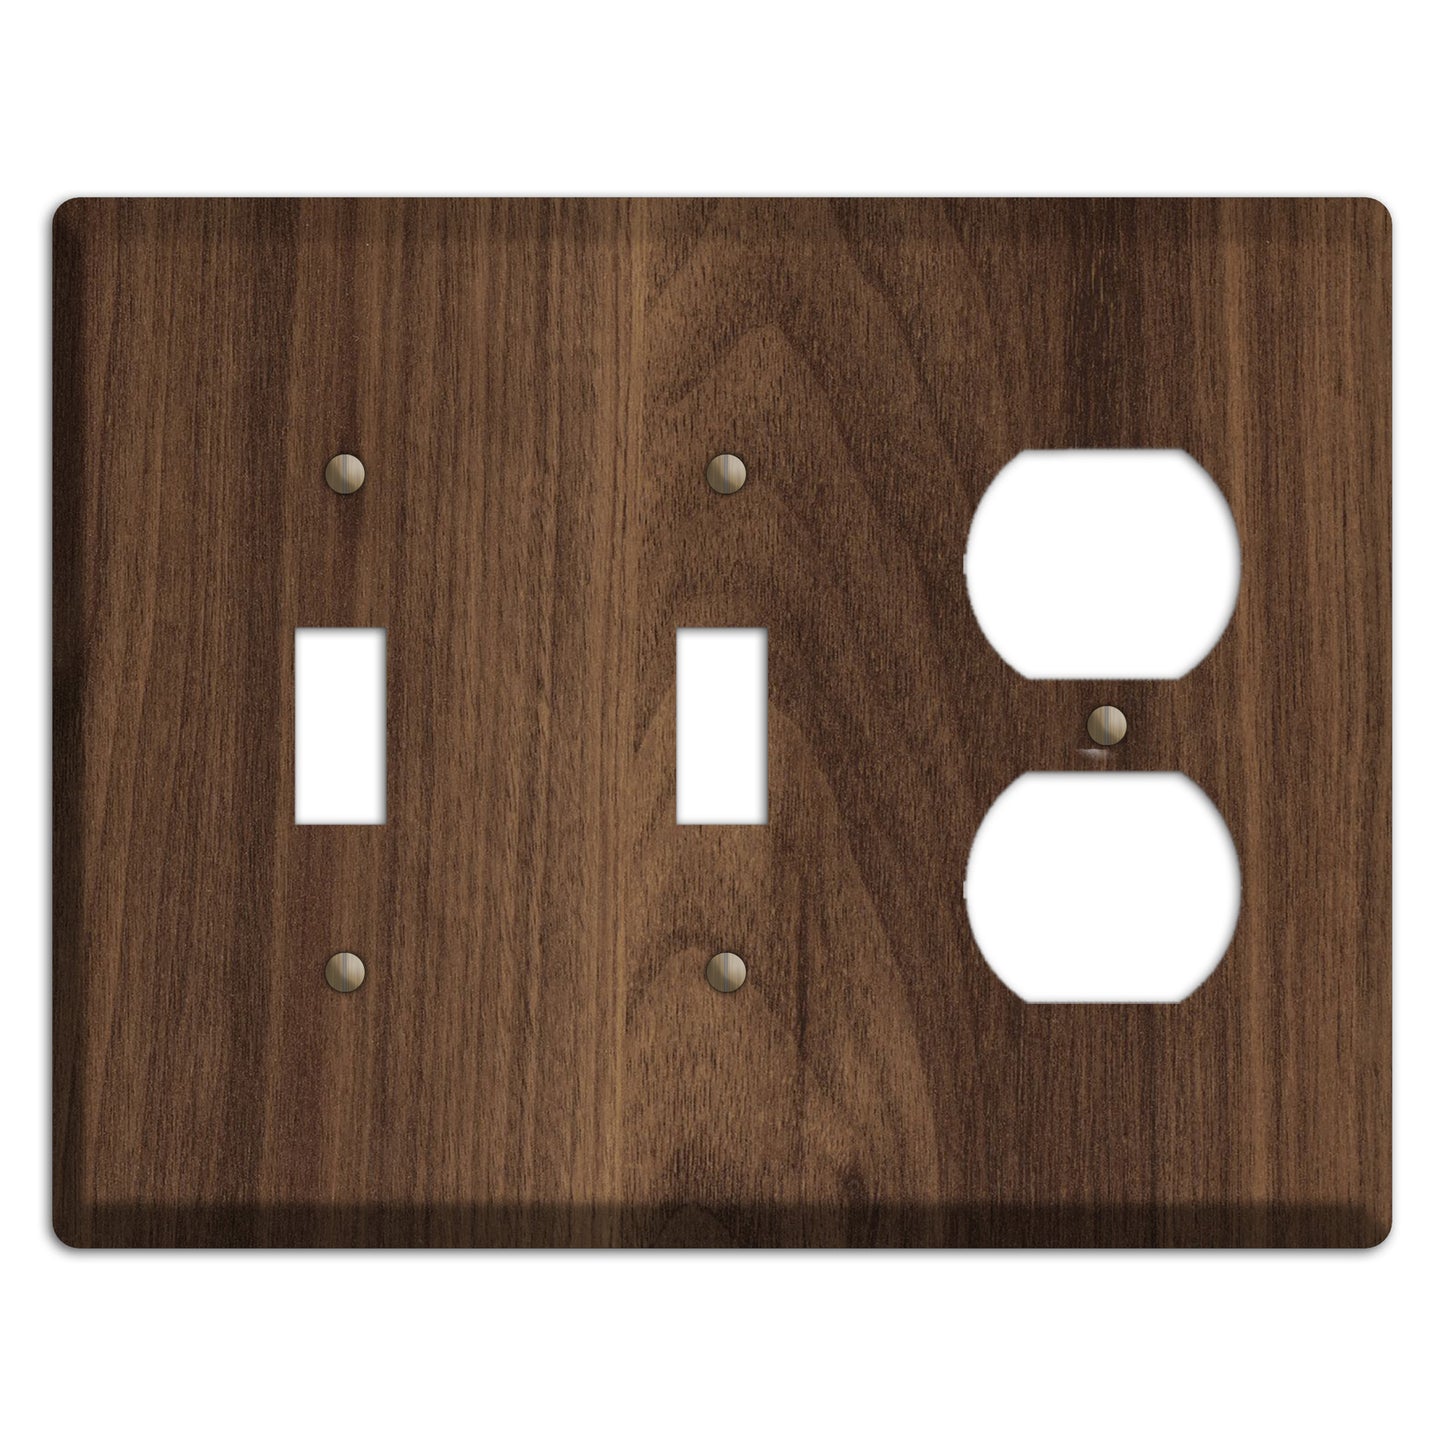 Walnut Wood 2 Toggle / Duplex Outlet Cover Plate